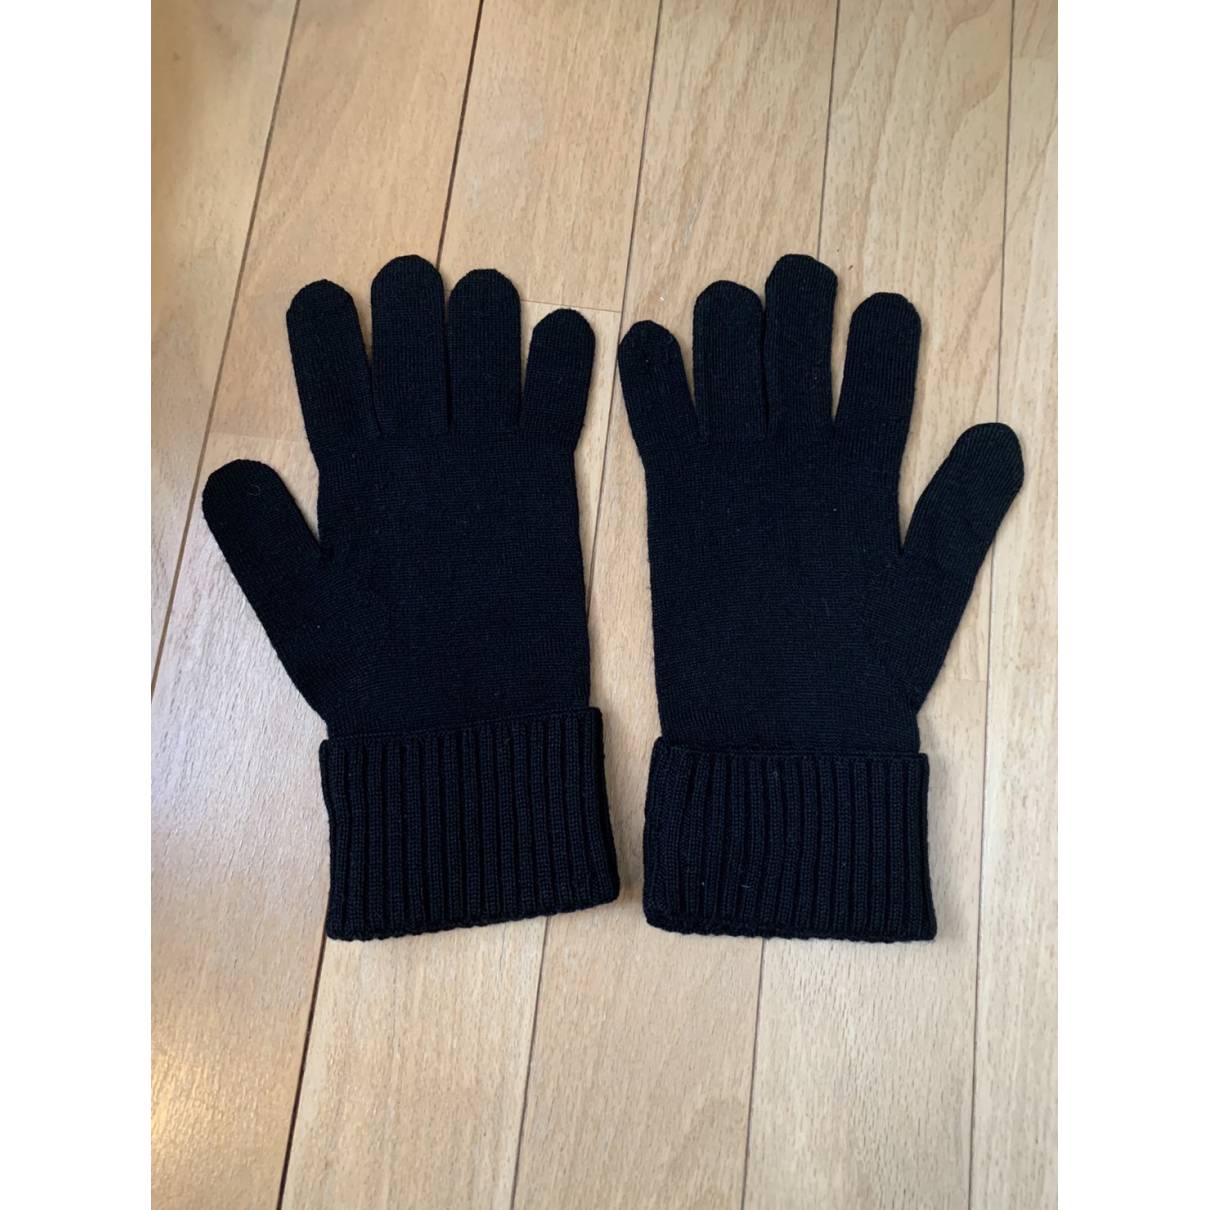 Louis Vuitton - Authenticated Gloves - Wool Black for Women, Very Good Condition